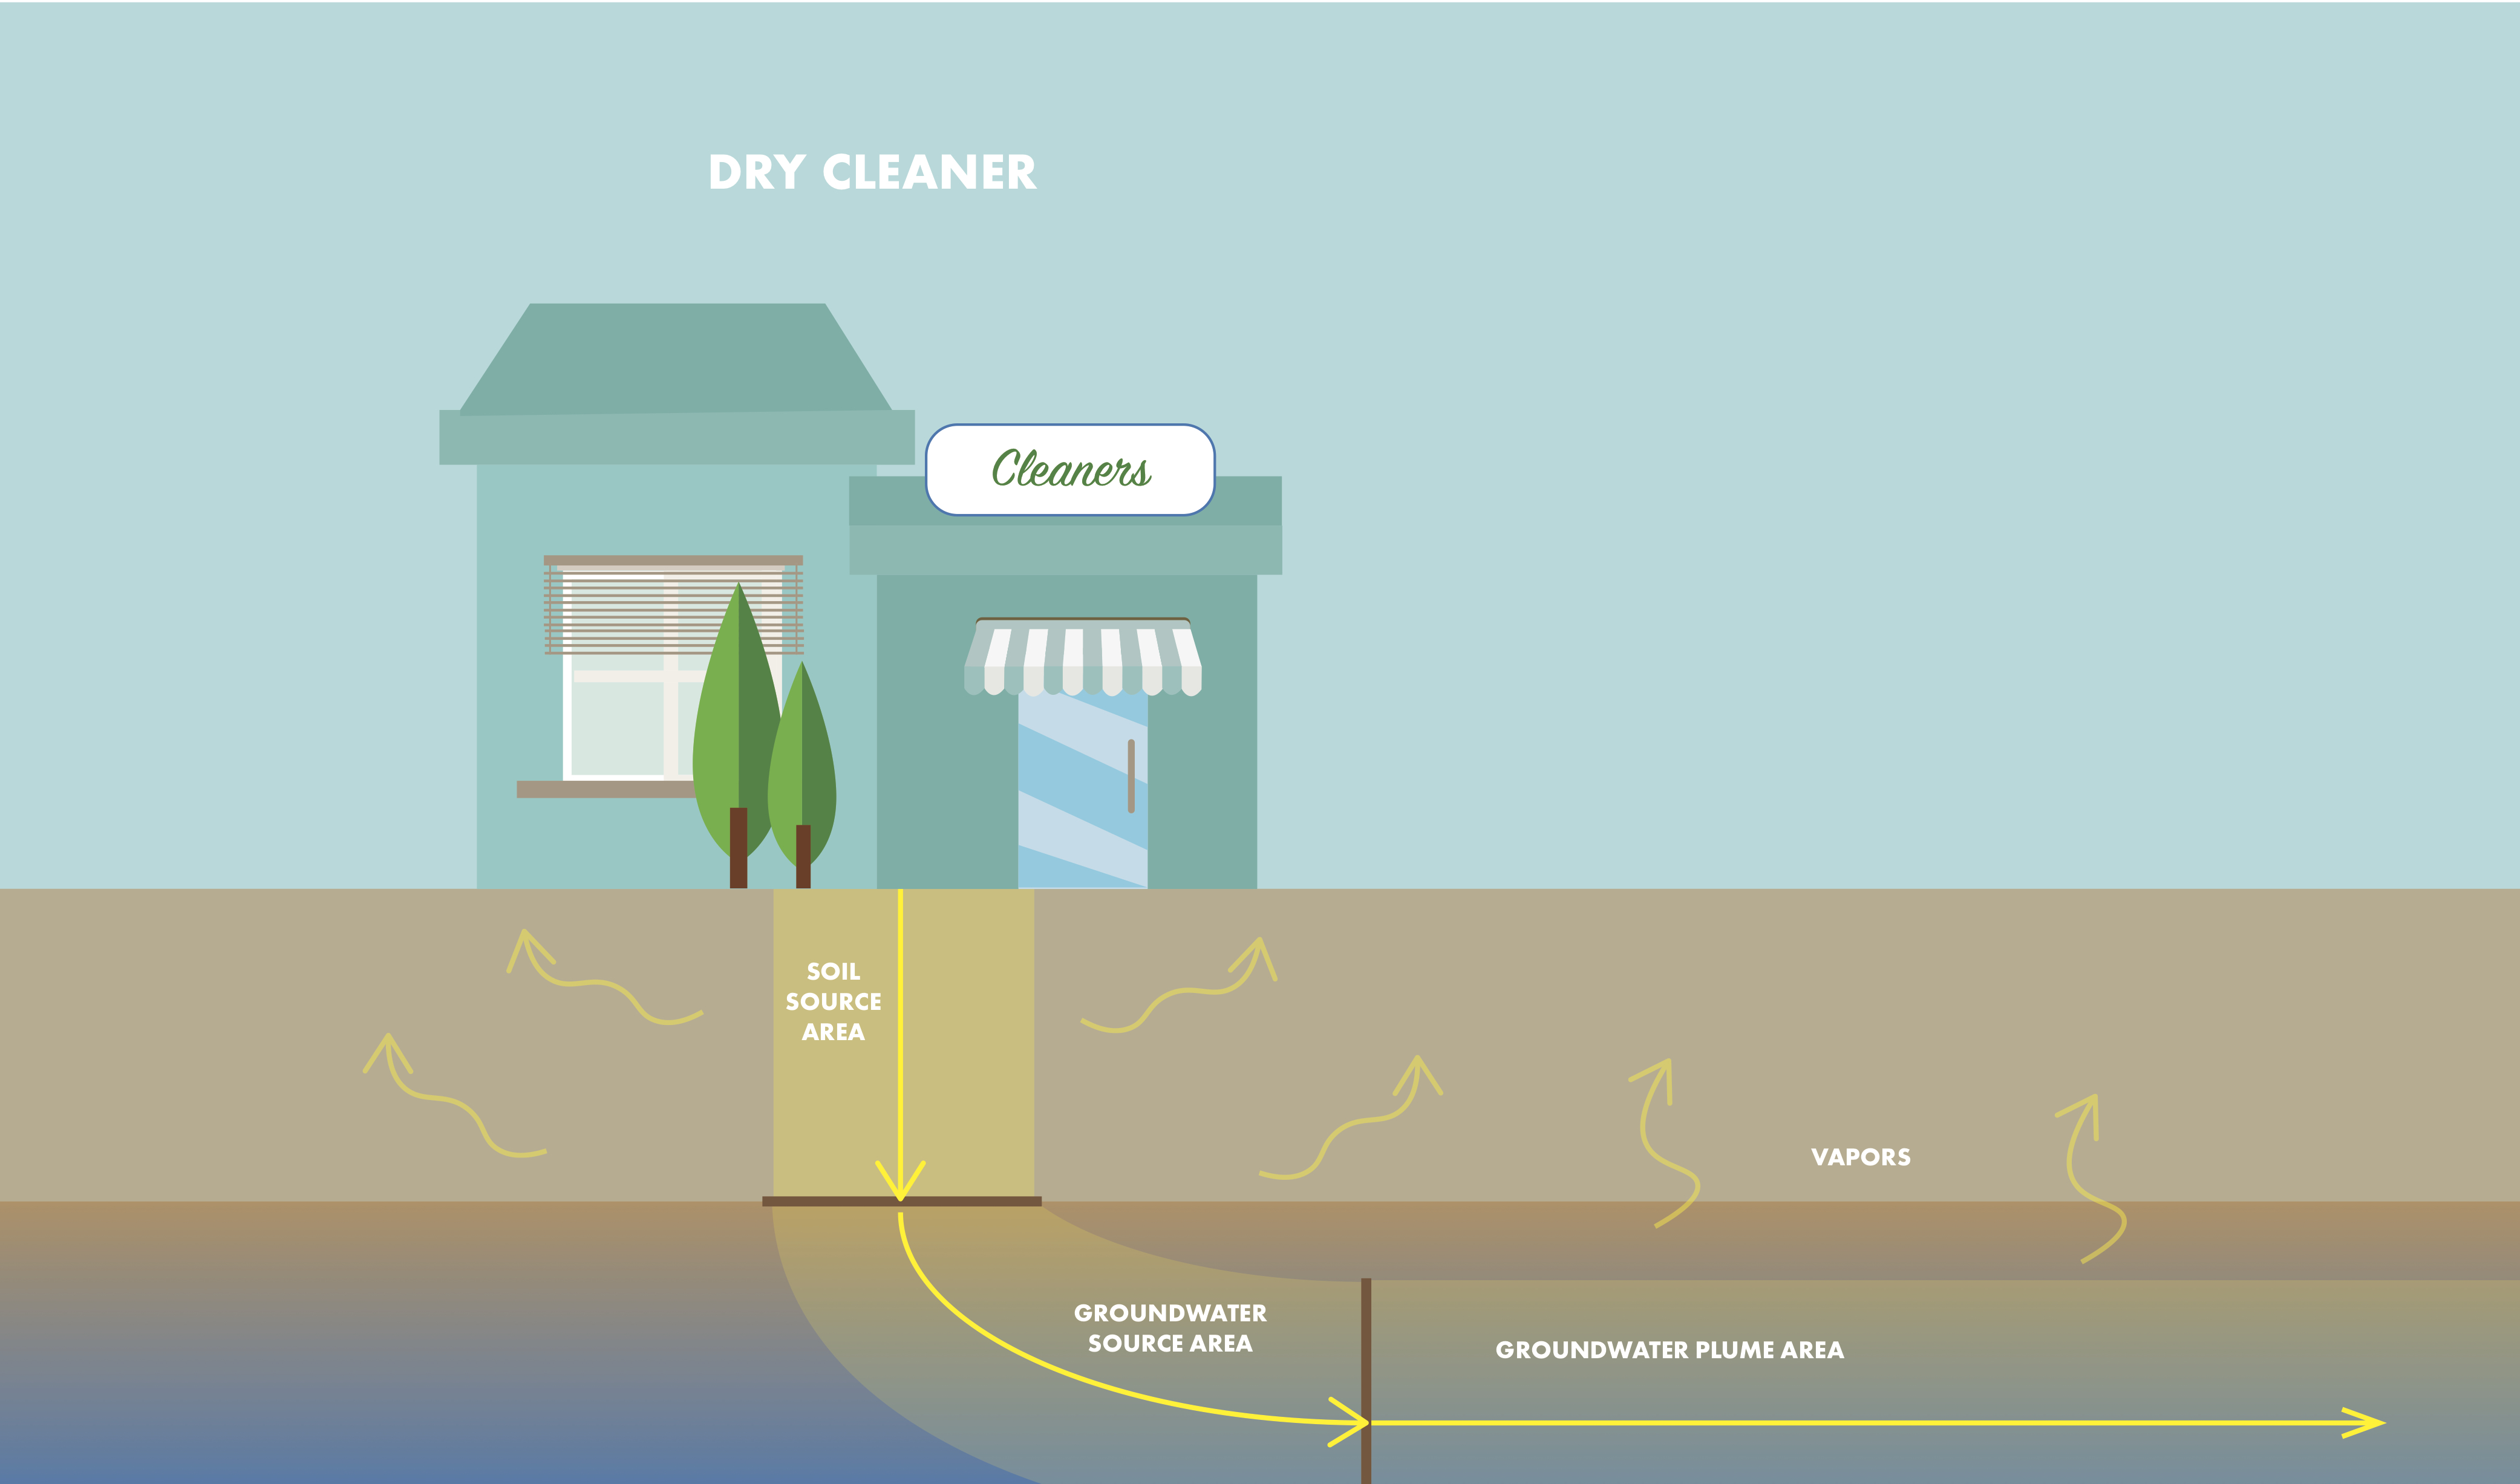 Infographic showing how drycleaning solvent can flow into soil and groundwater and all of the environmental issues that will need to be remediated